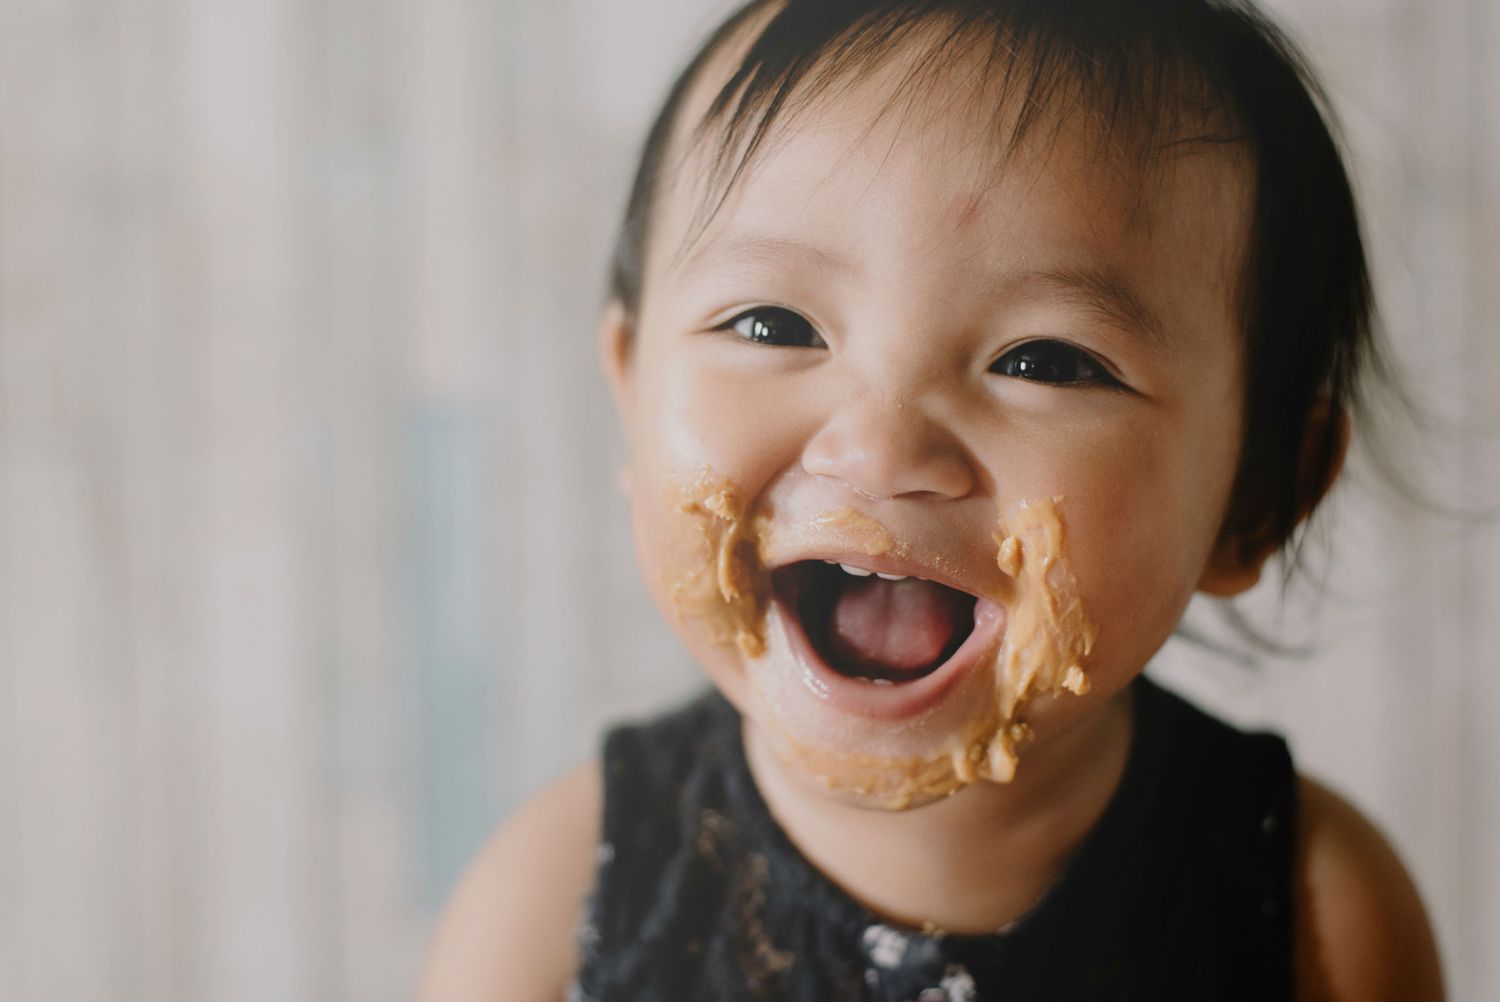 Introducing Peanut Butter to Your Baby